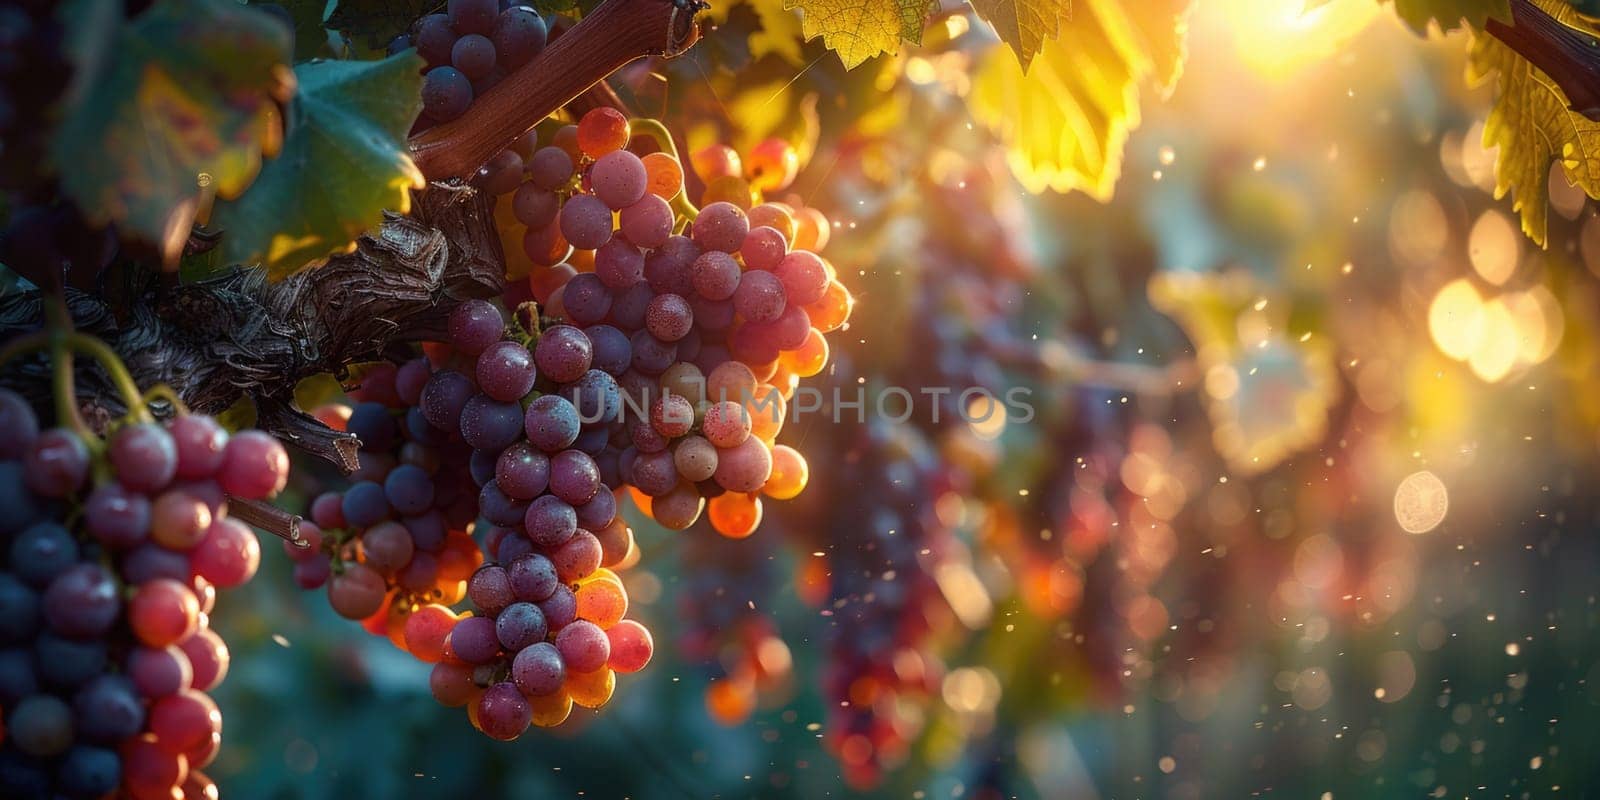 A cluster of ripe grapes hanging from a vine in close-up view, showcasing the fruit at its peak freshness.